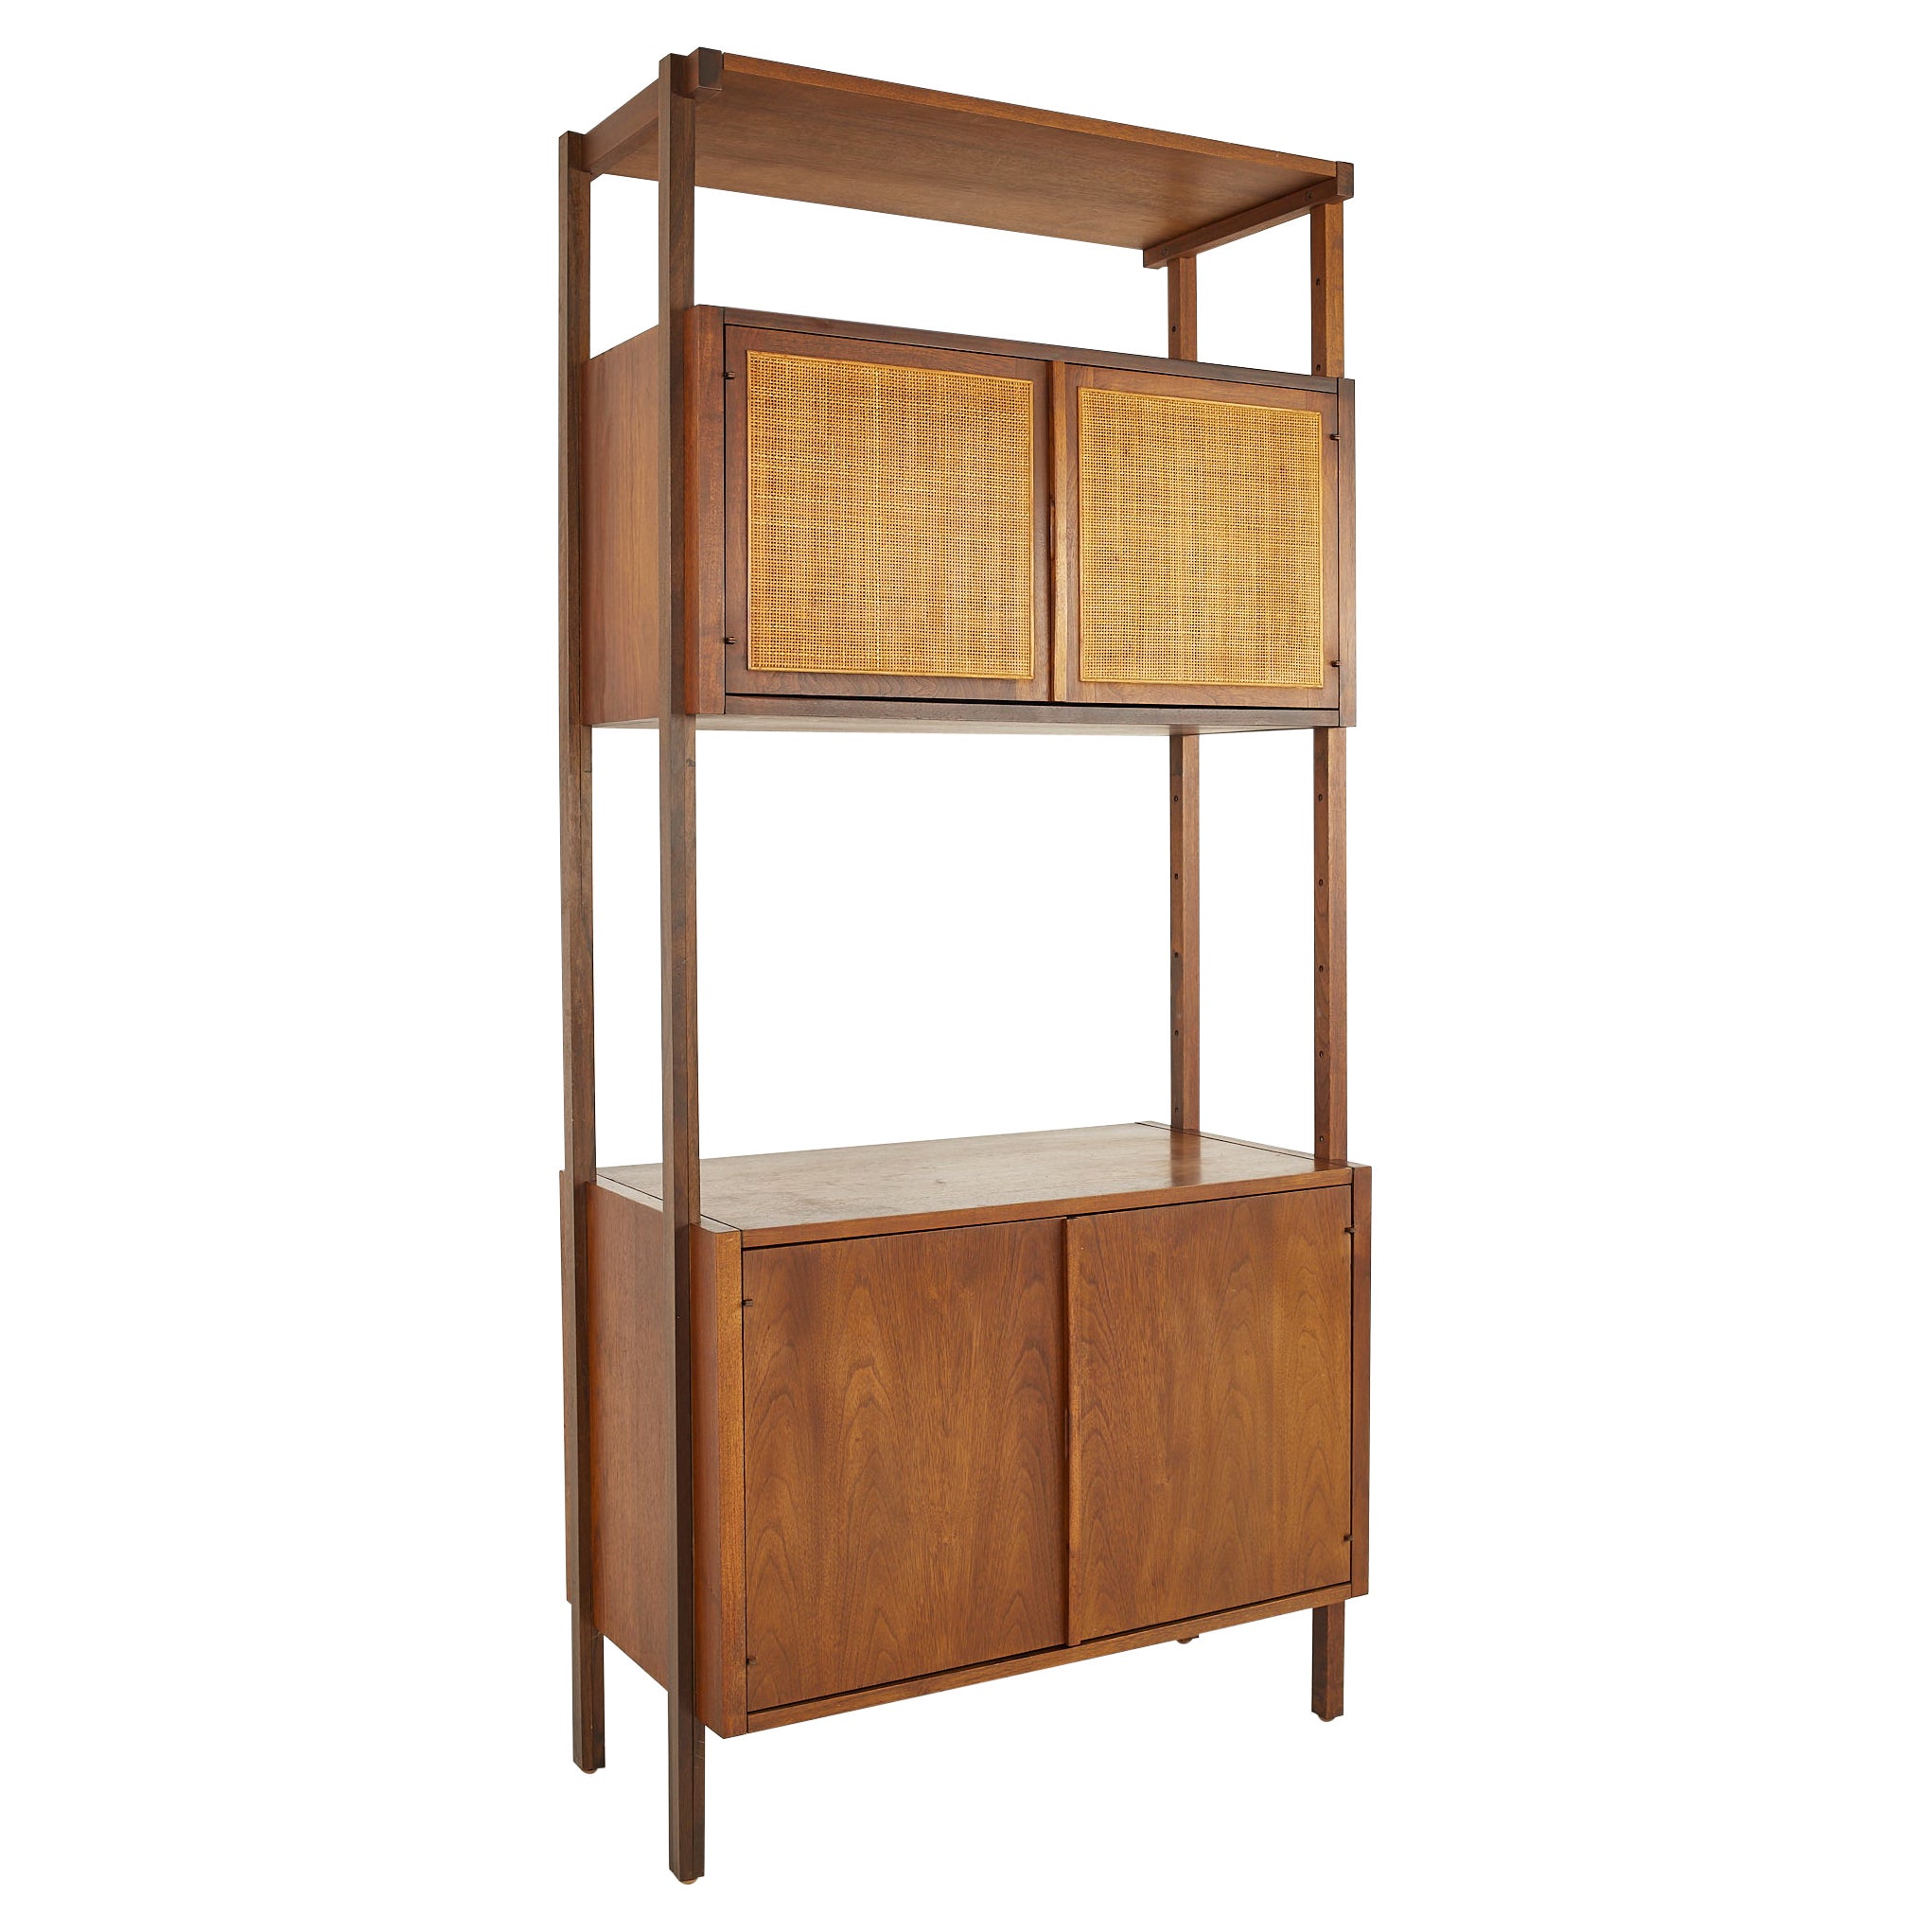 Founders Style MCM Walnut Cane Front Freestanding Wall Unit Section Bookcase